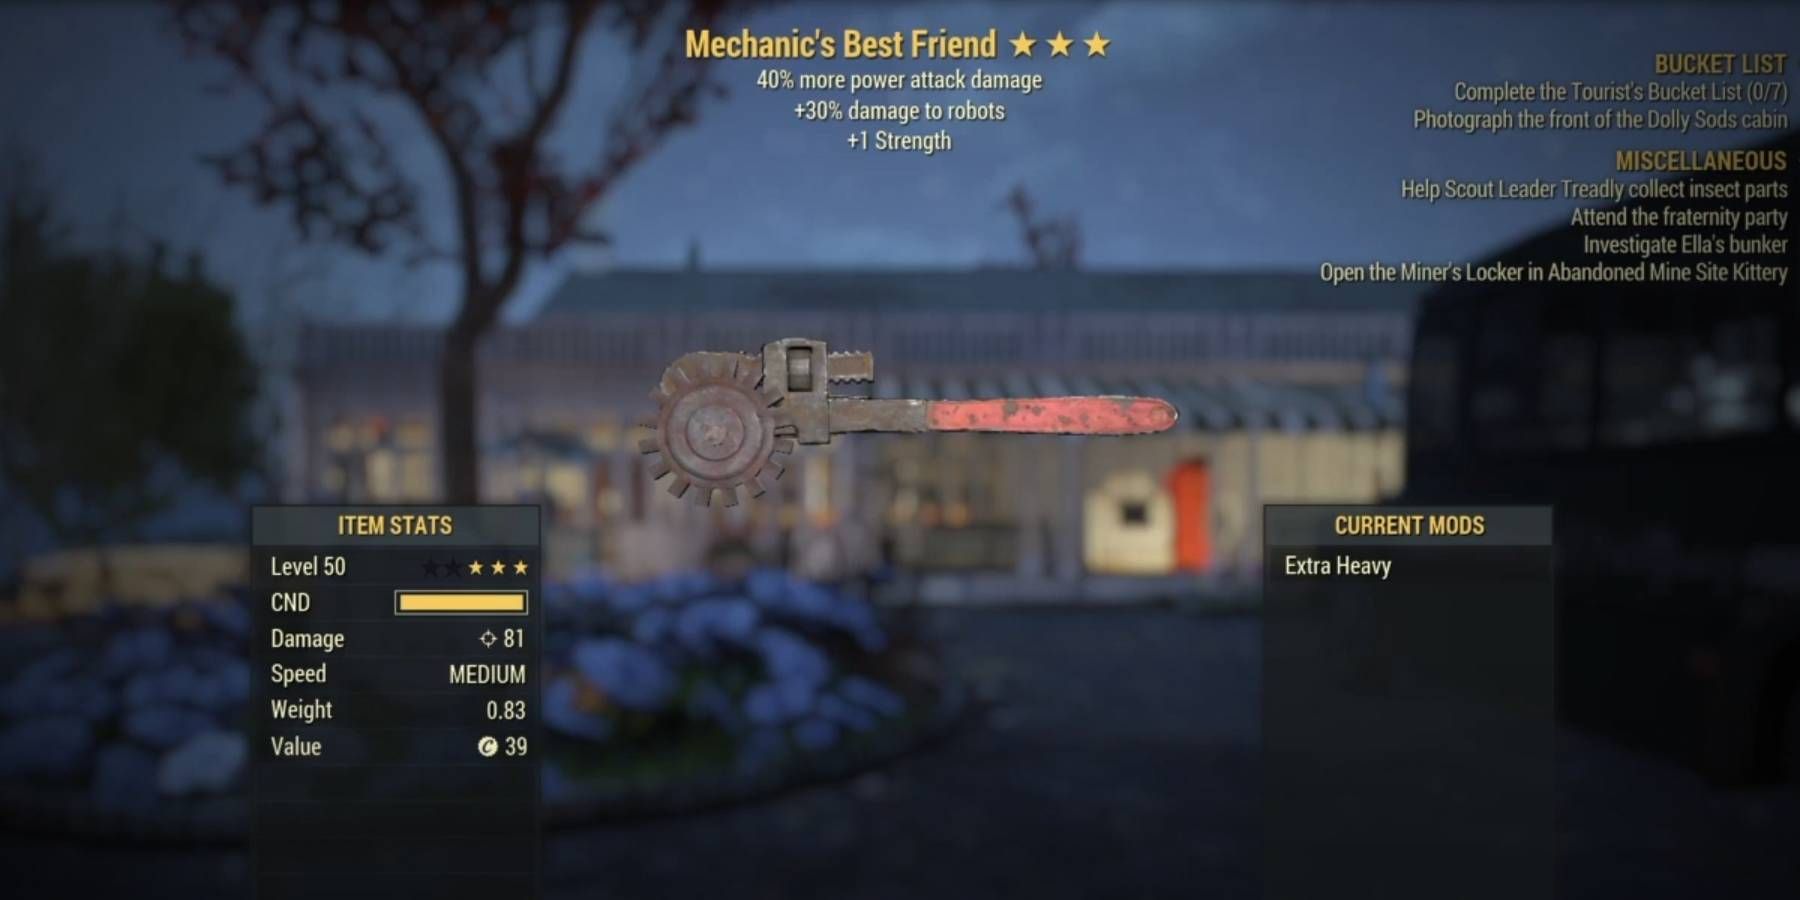 How To Get The Mechanic's Best Friend In Fallout 76